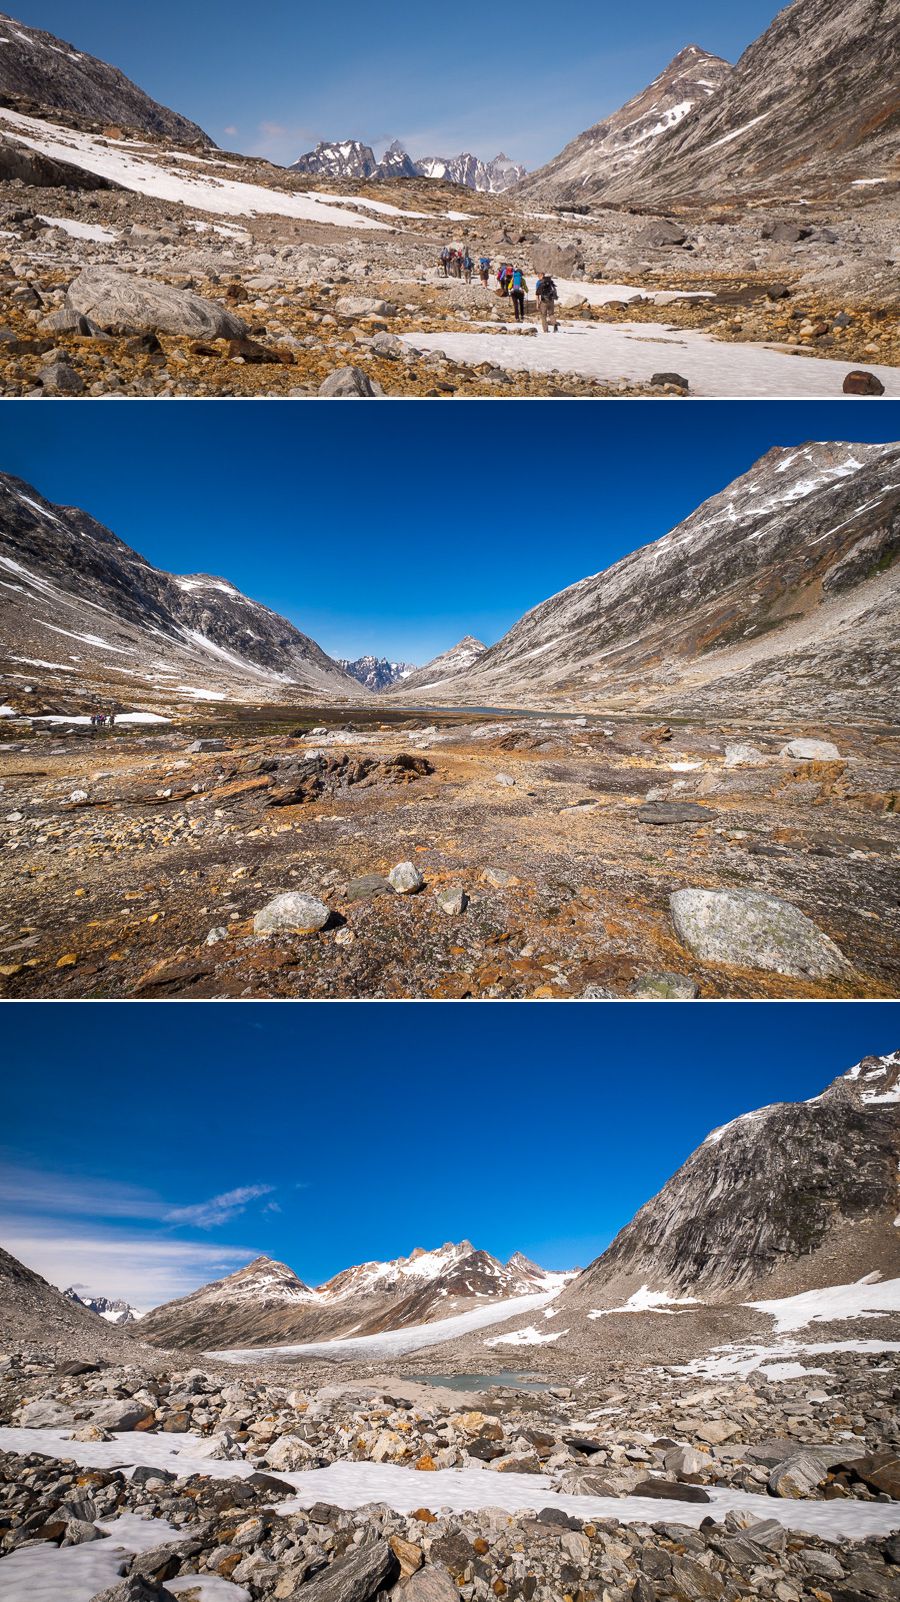 Different views as we crossed the pass from the Tunup Kua Valley to the Tasiilap Nua Valley